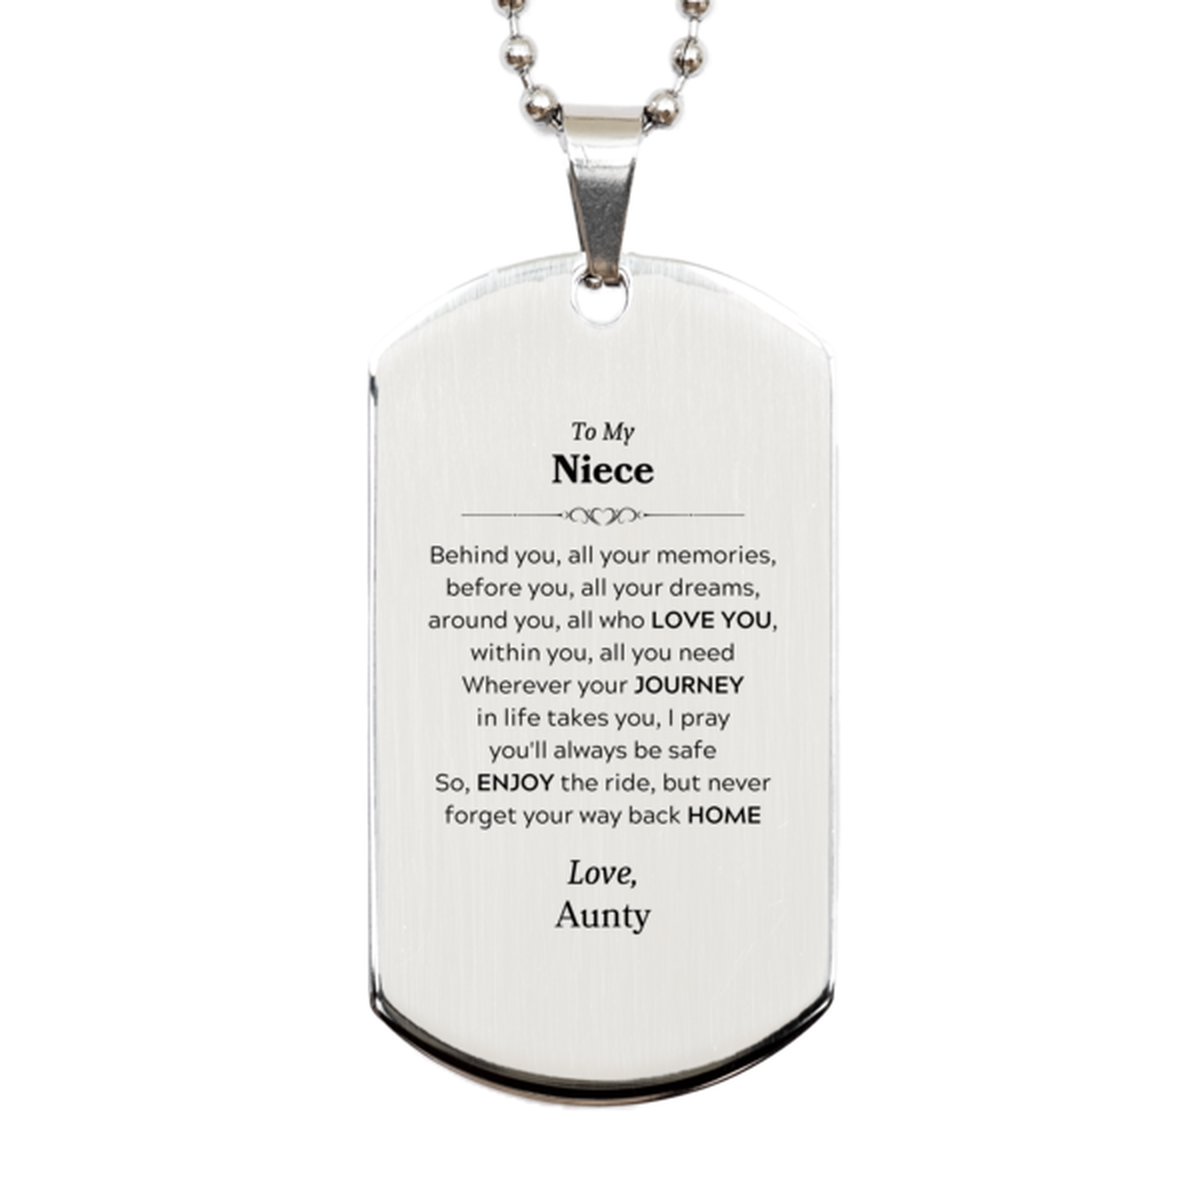 To My Niece Graduation Gifts from Aunty, Niece Silver Dog Tag Christmas Birthday Gifts for Niece Behind you, all your memories, before you, all your dreams. Love, Aunty